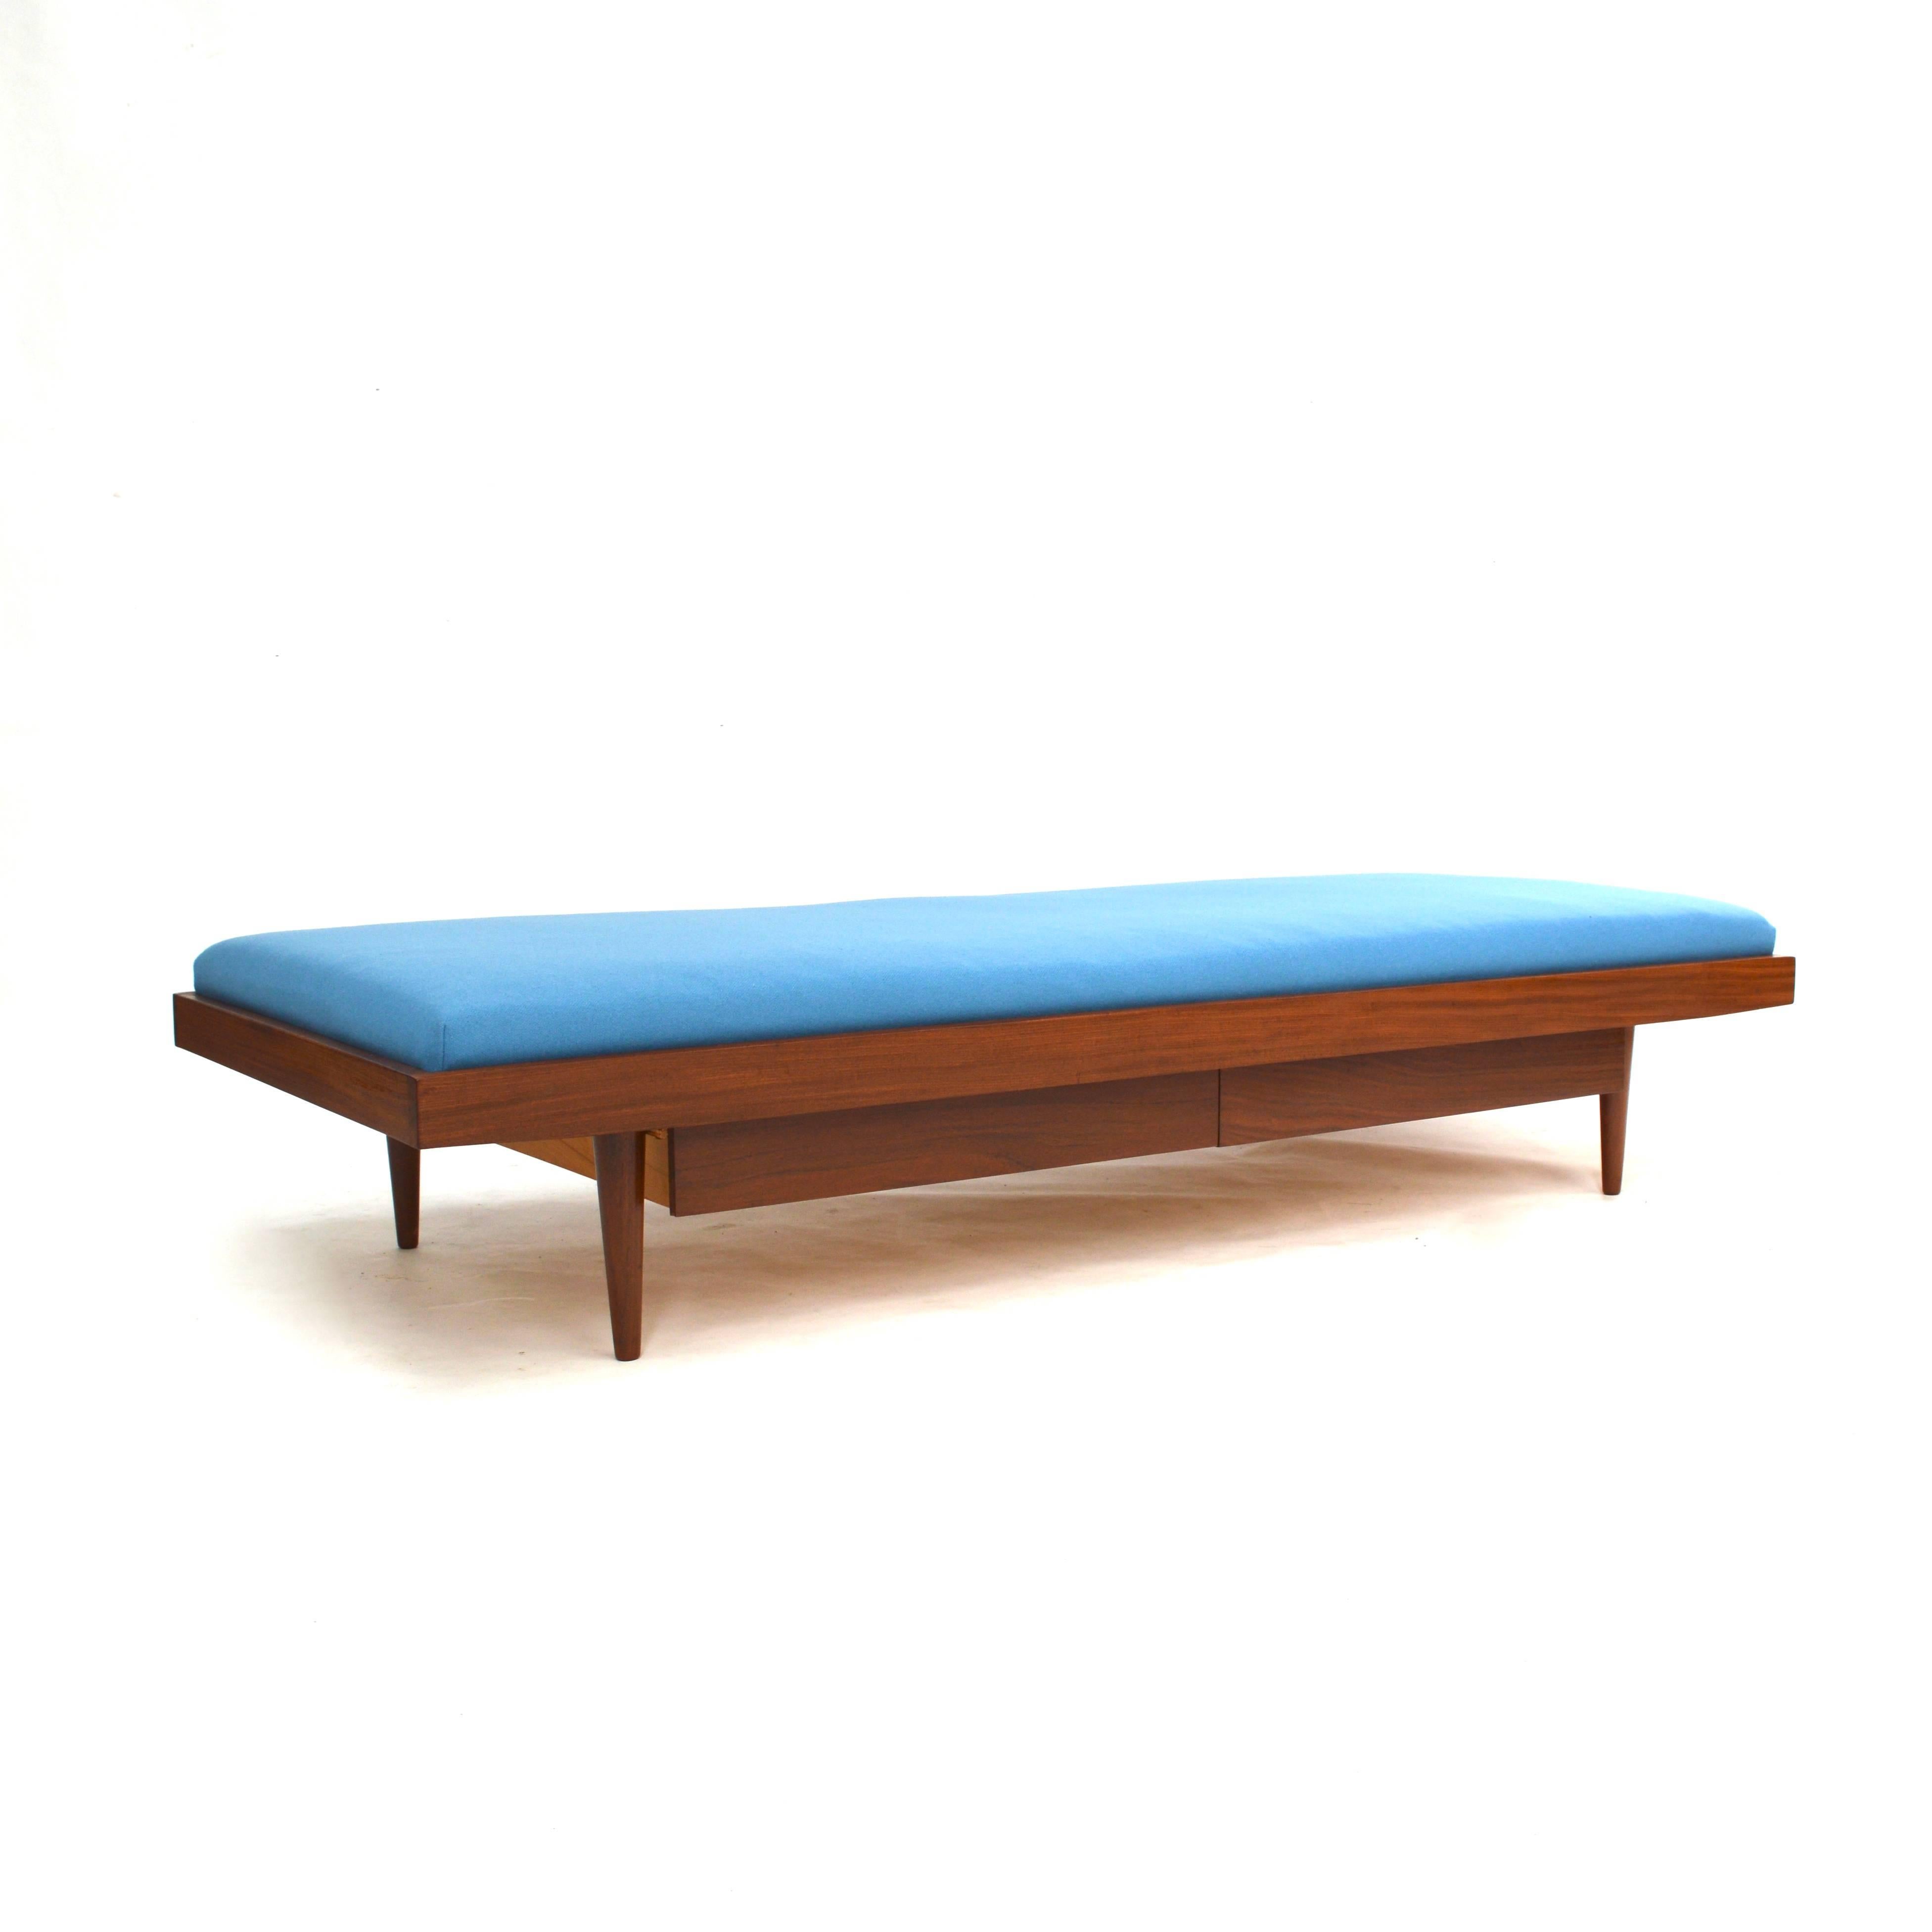 Gorgeous daybed available in sky blue upholstery. New upholstery and new foam interior. 

Designer: Unknown

Manufacturer: Unknown

Country: Netherlands

Model: Daybed with two drawers

Design period: 1950s

Date of manufacturing: